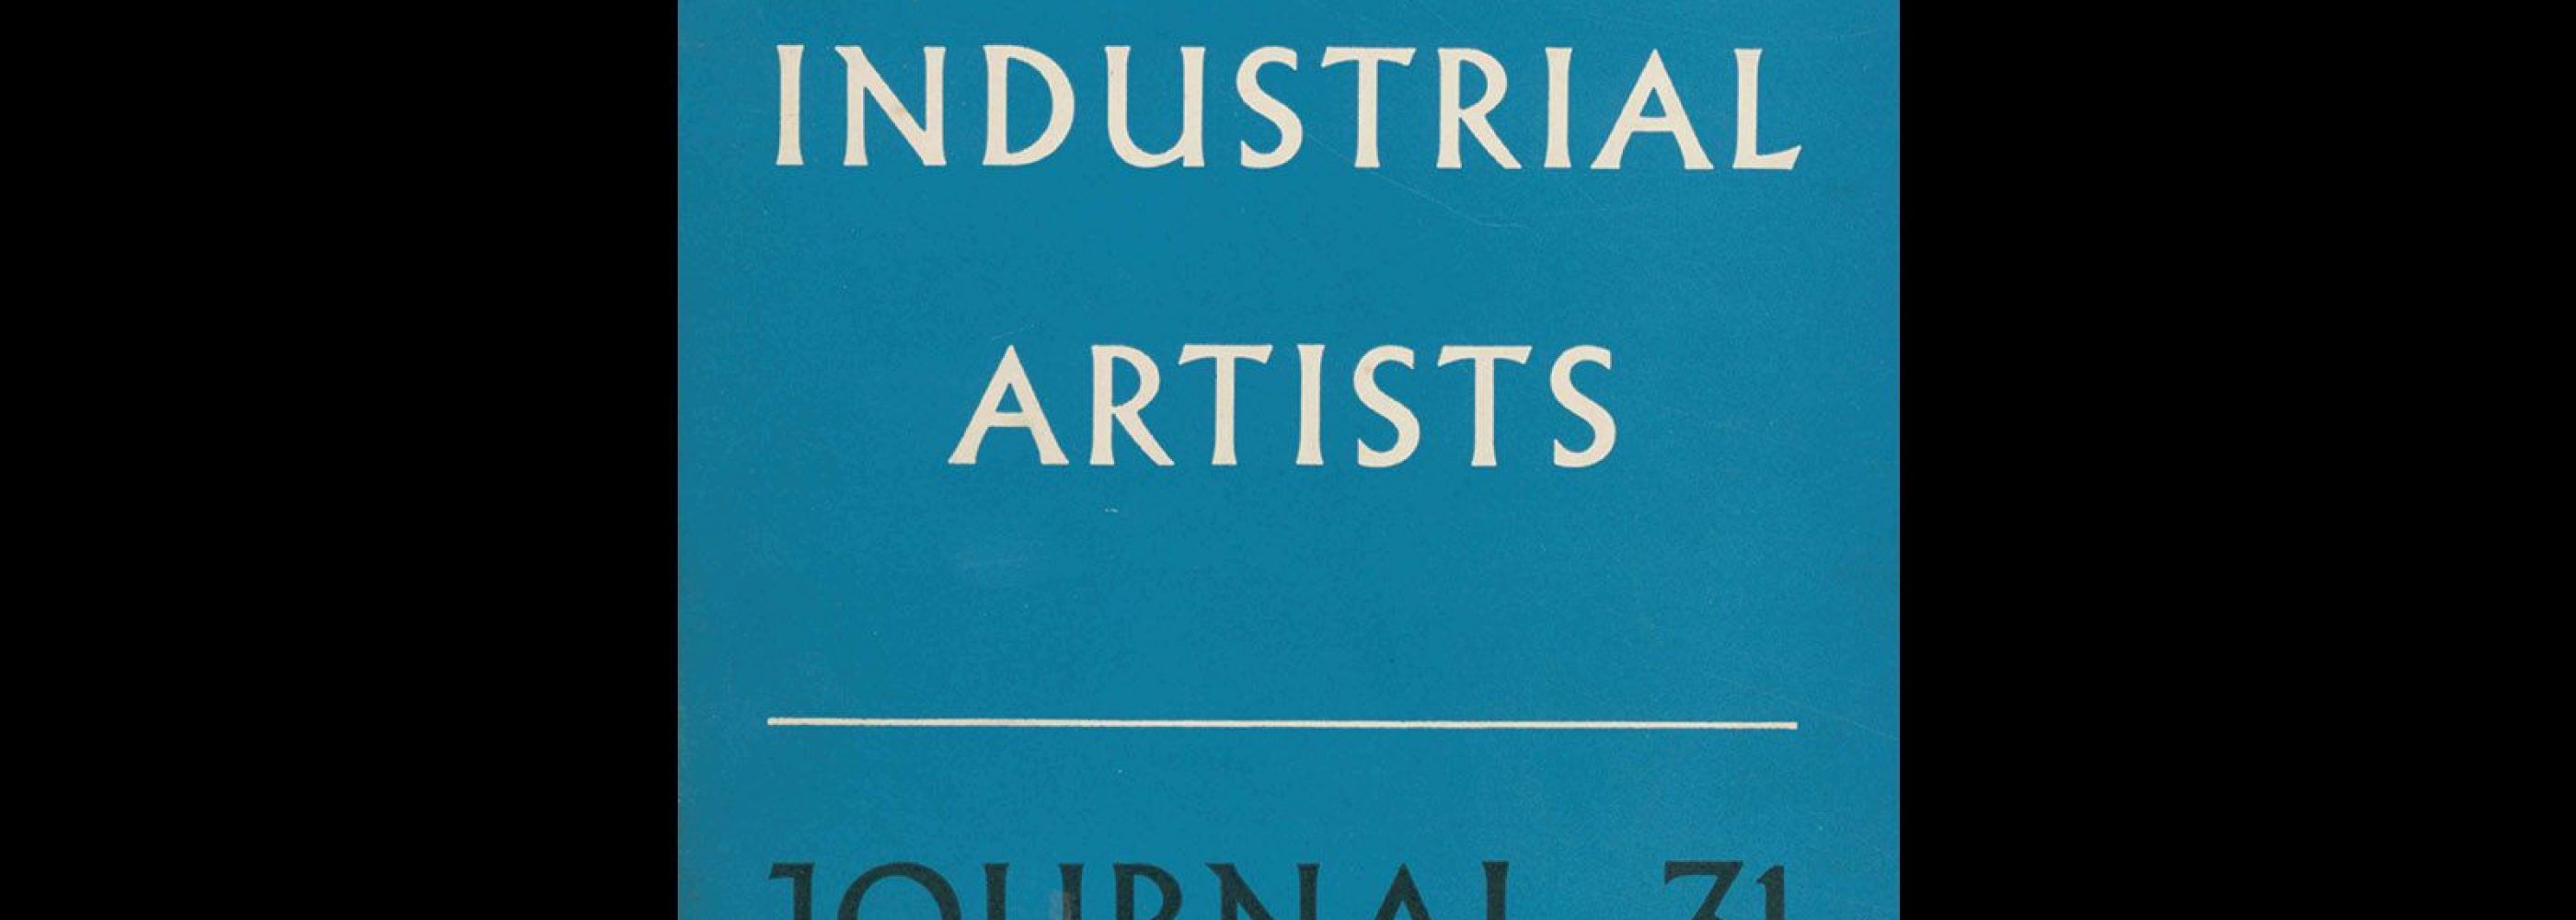 Society of Industrial Artists, 31, February 1953